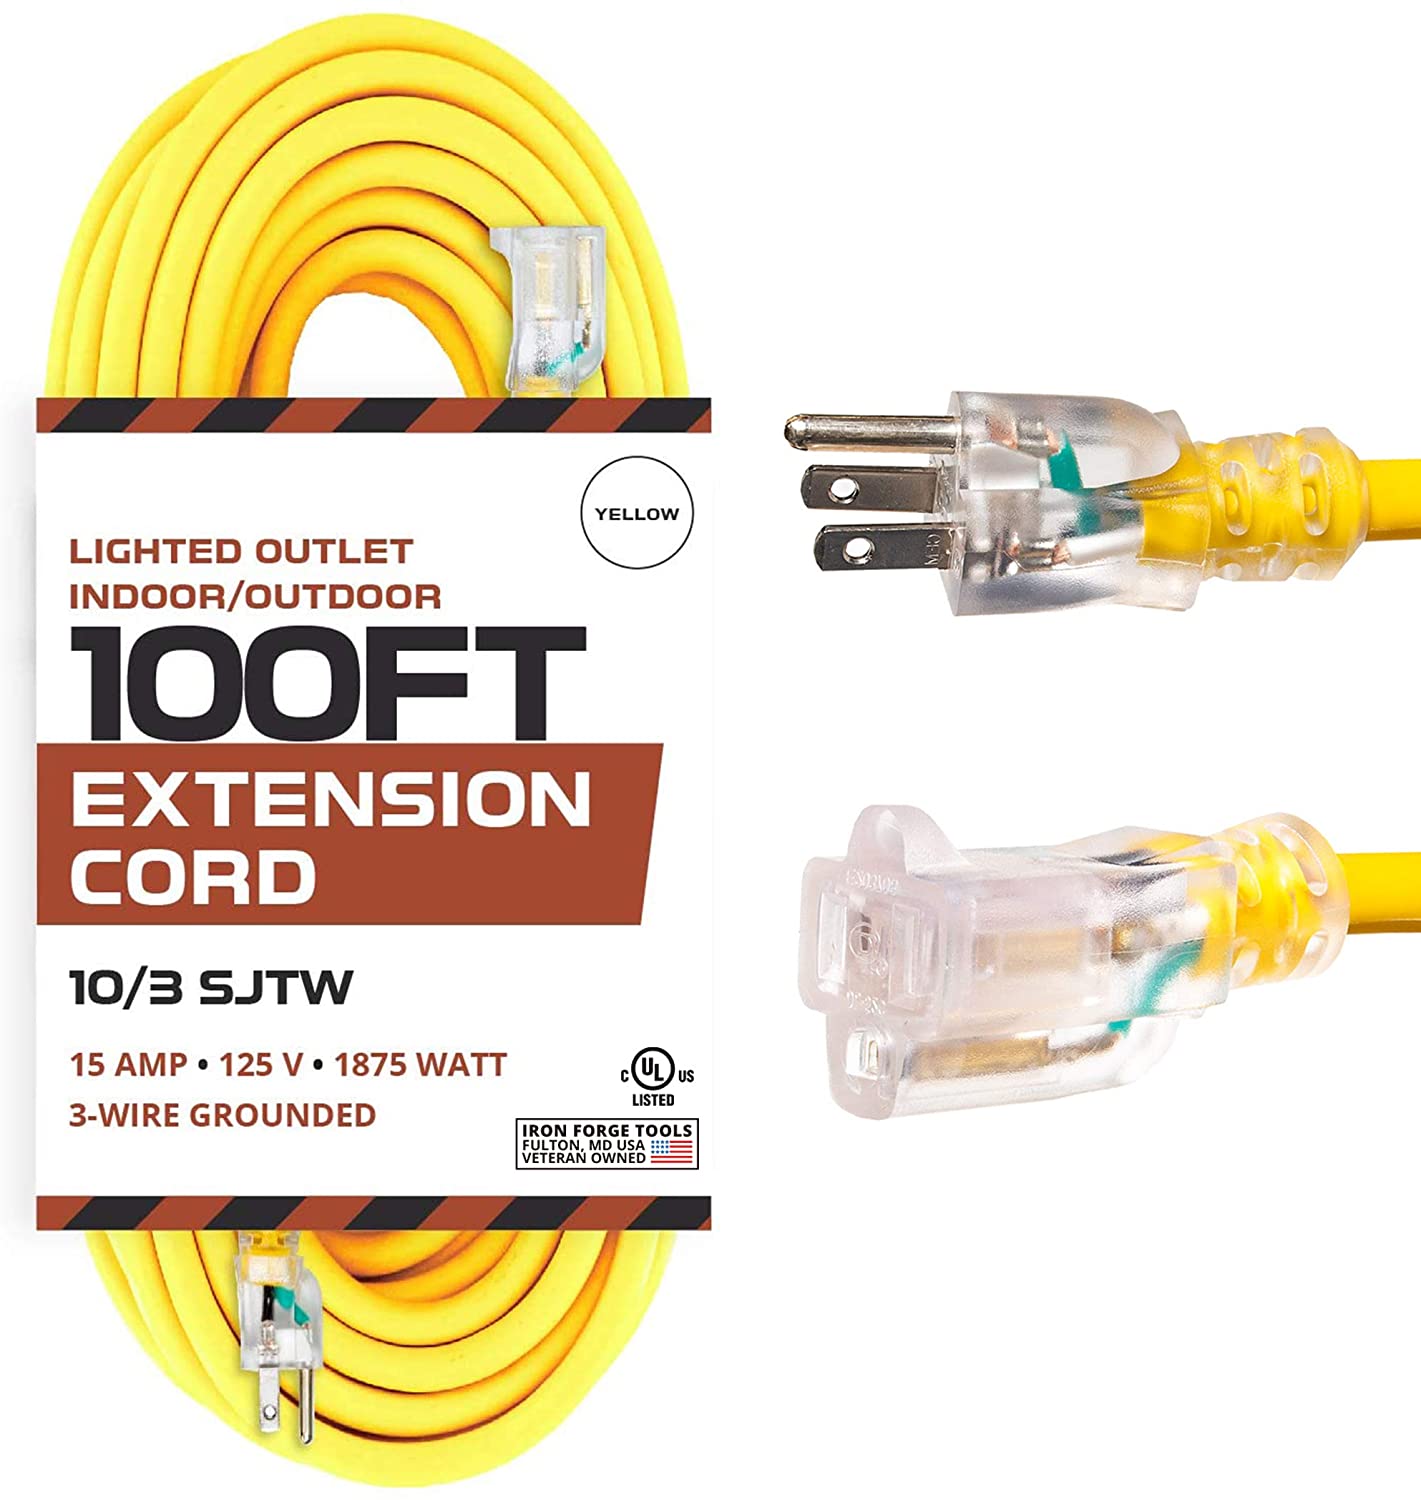 100 Foot Lighted Outdoor Extension Cord - 10/3 SJTW Yellow 10 Gauge Ex -  iron forge tools